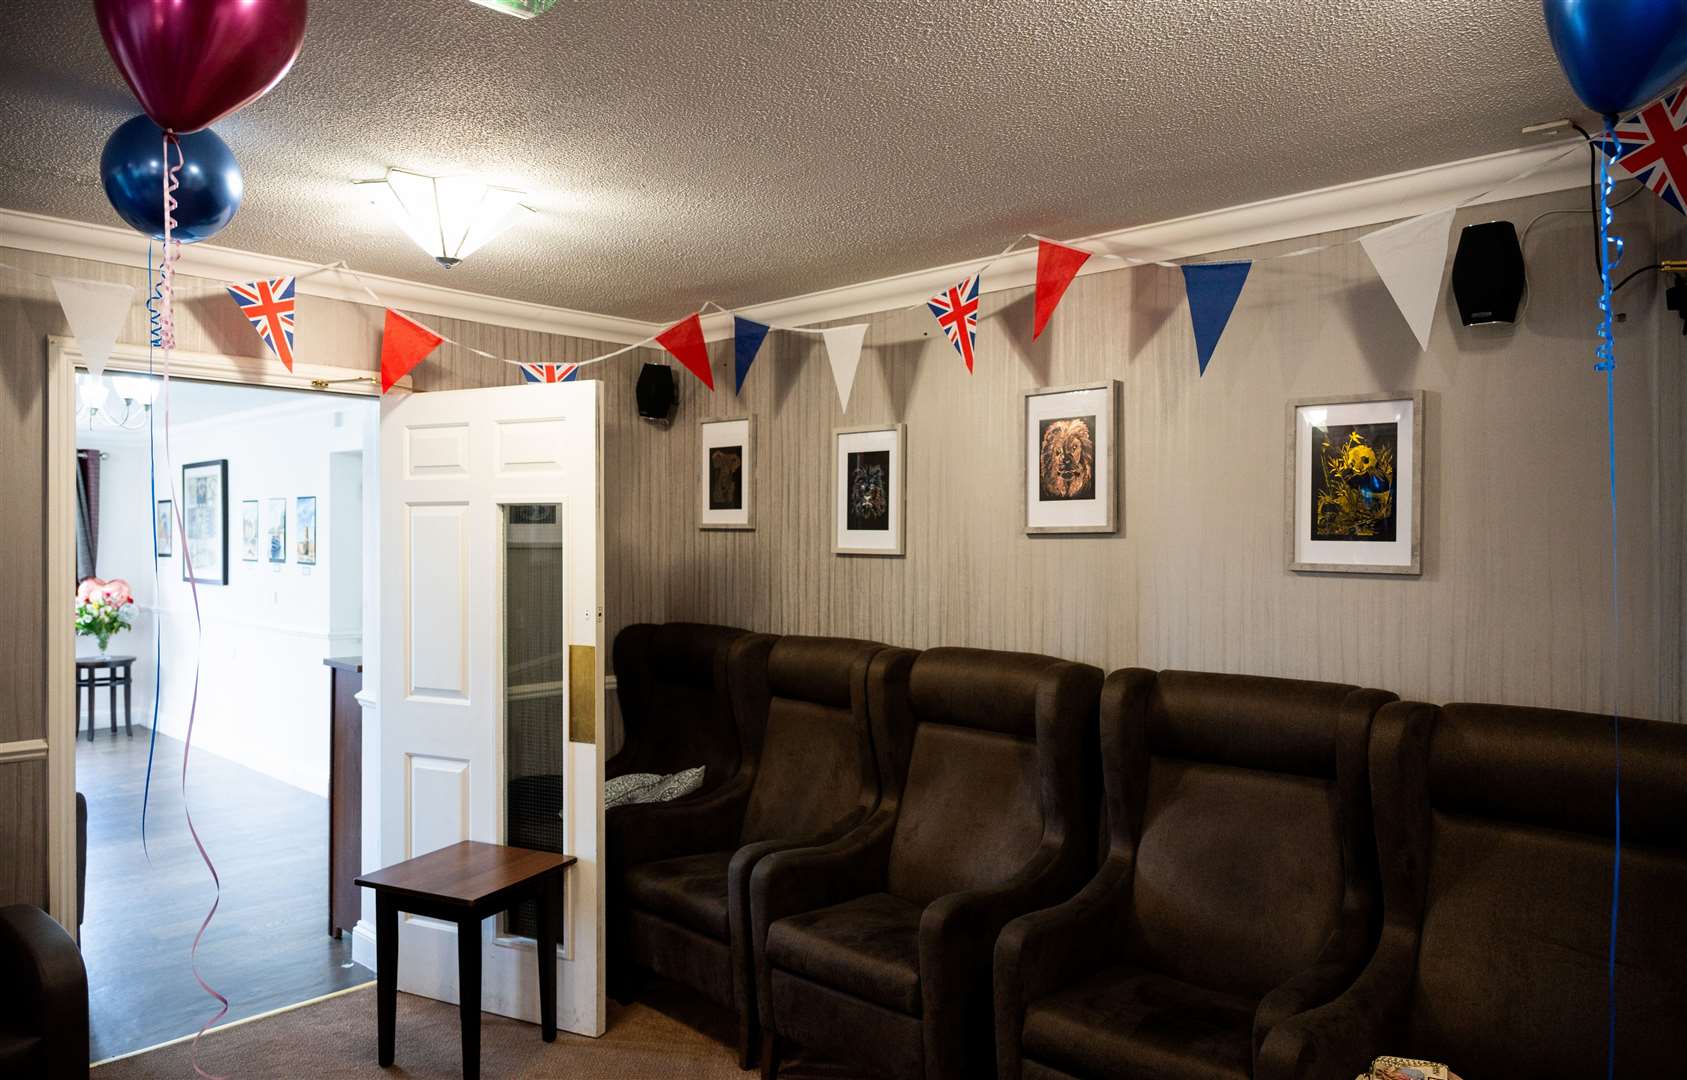 The two rooms decorated for the occasion